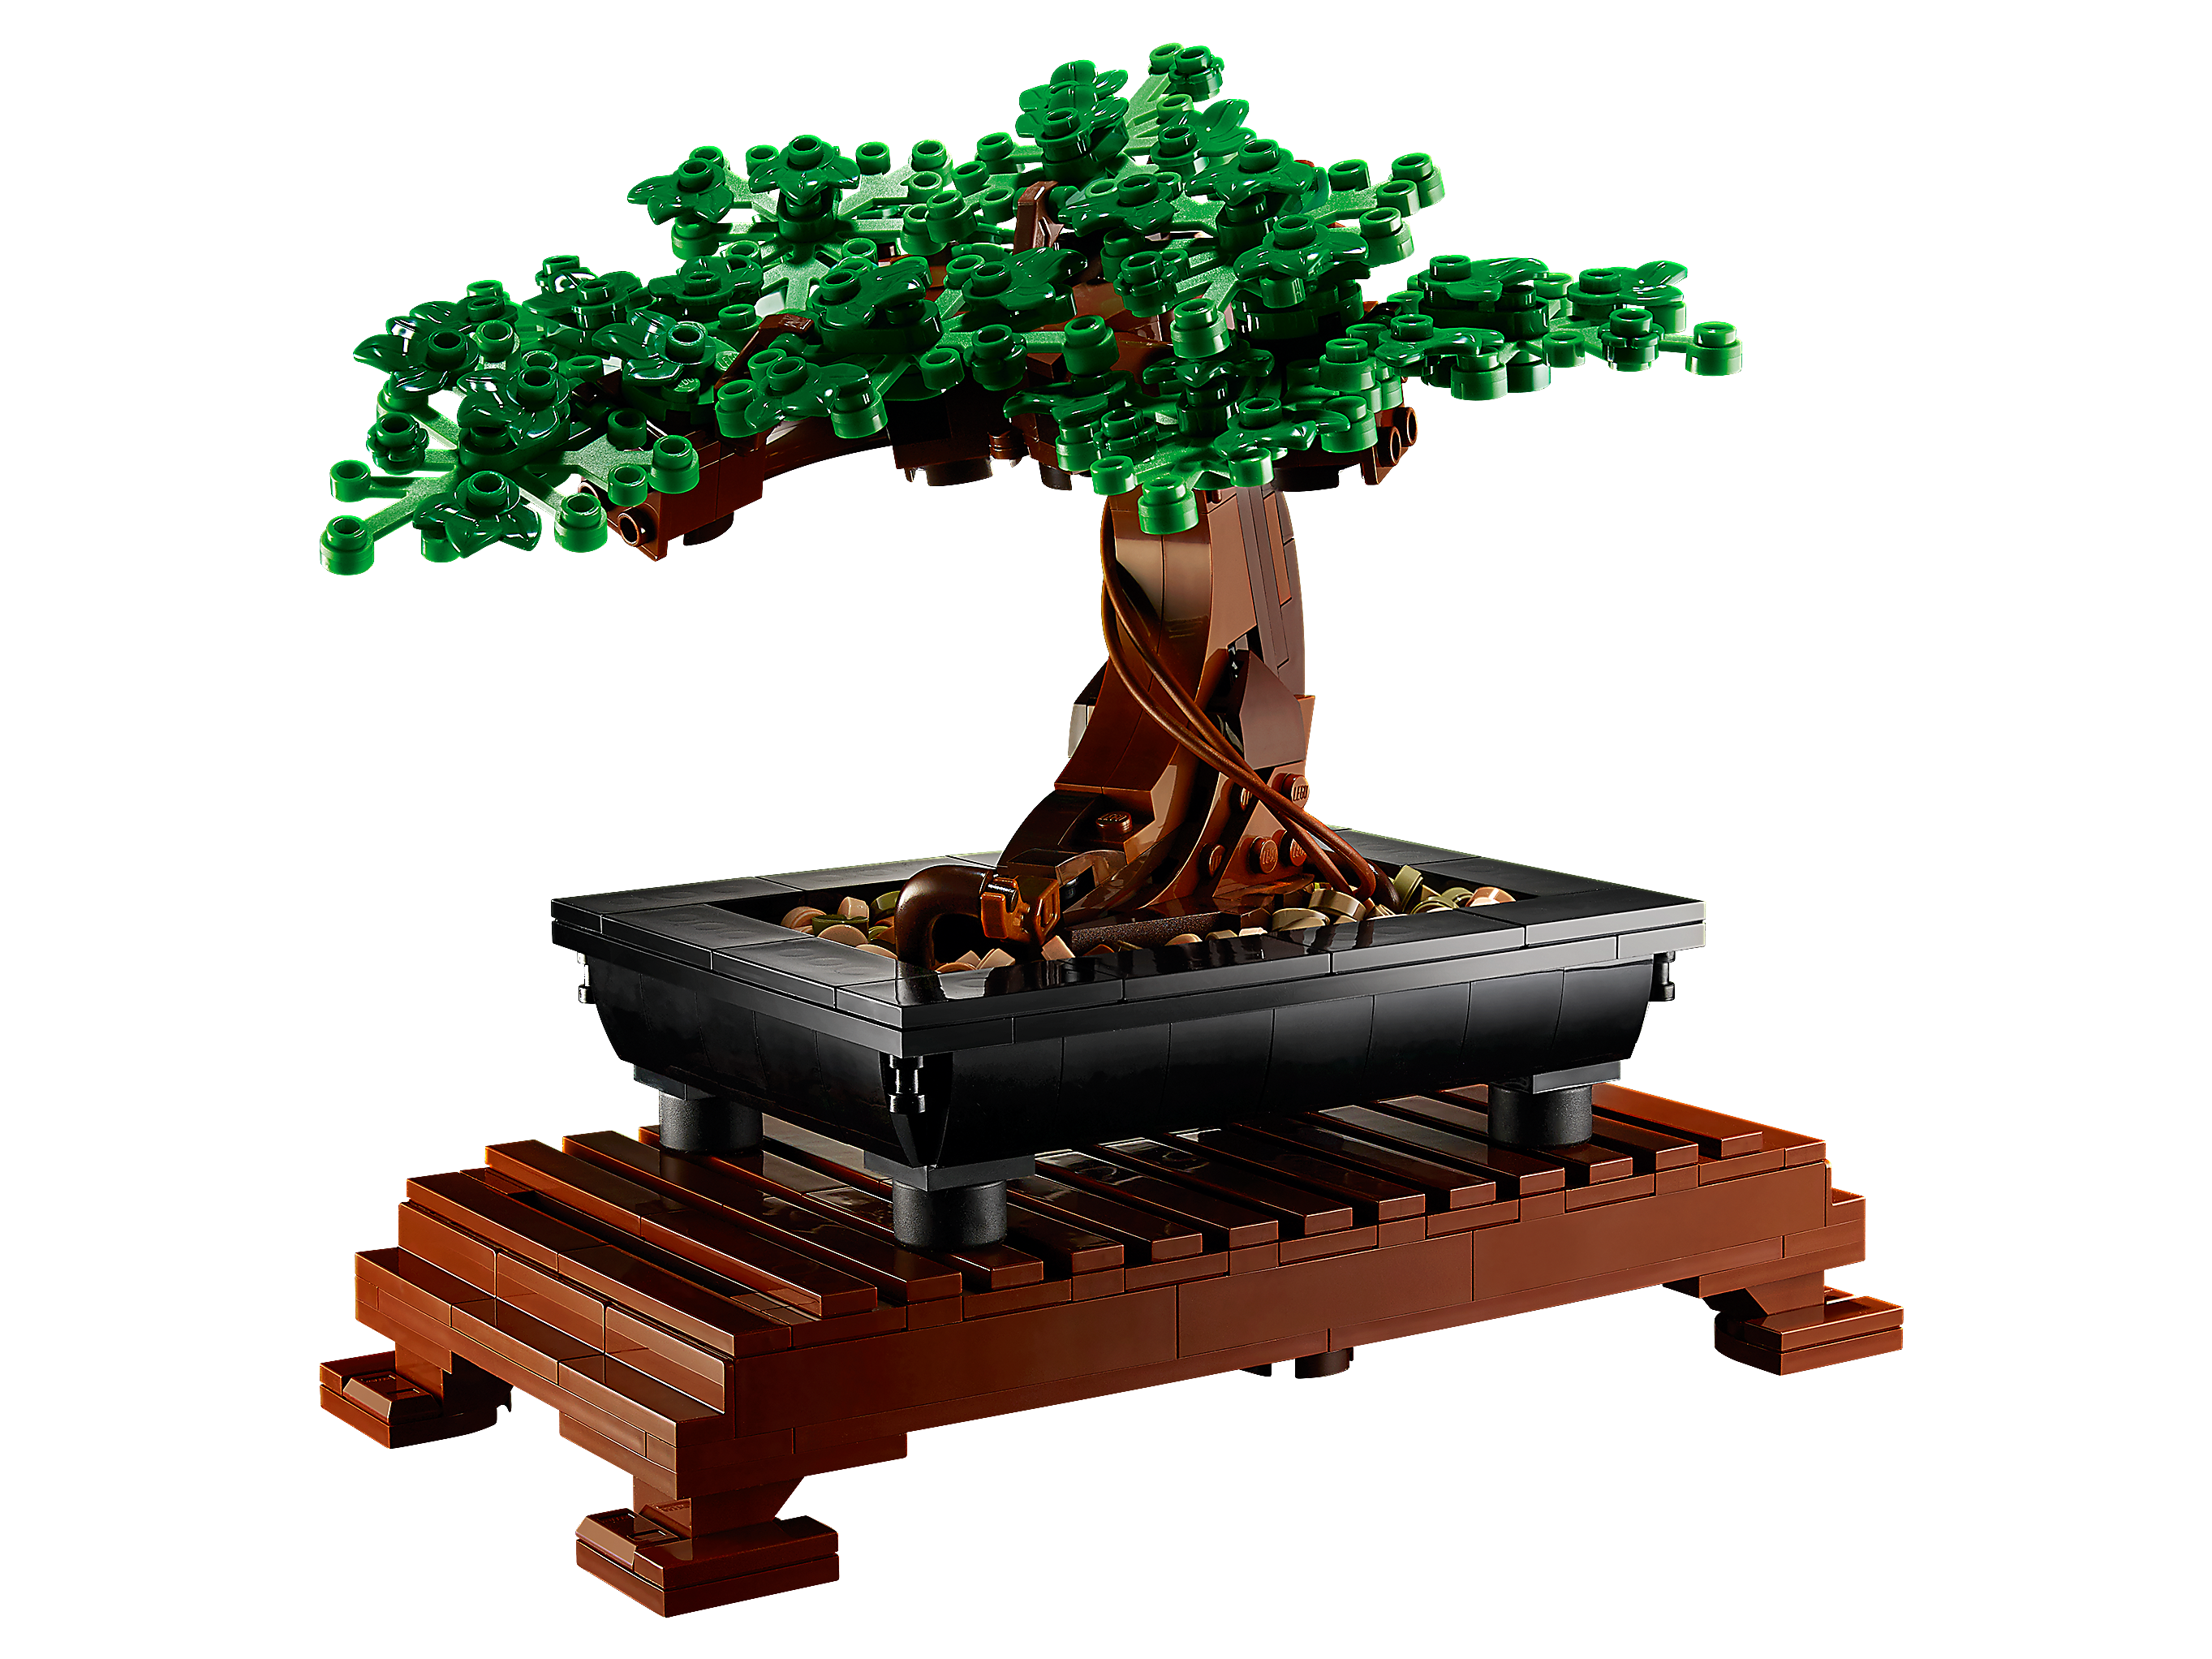 New 2021 878 Pieces LEGO Bonsai Tree 10281 Building Kit a Building Project to Focus The Mind with a Beautiful Display Piece to Enjoy 